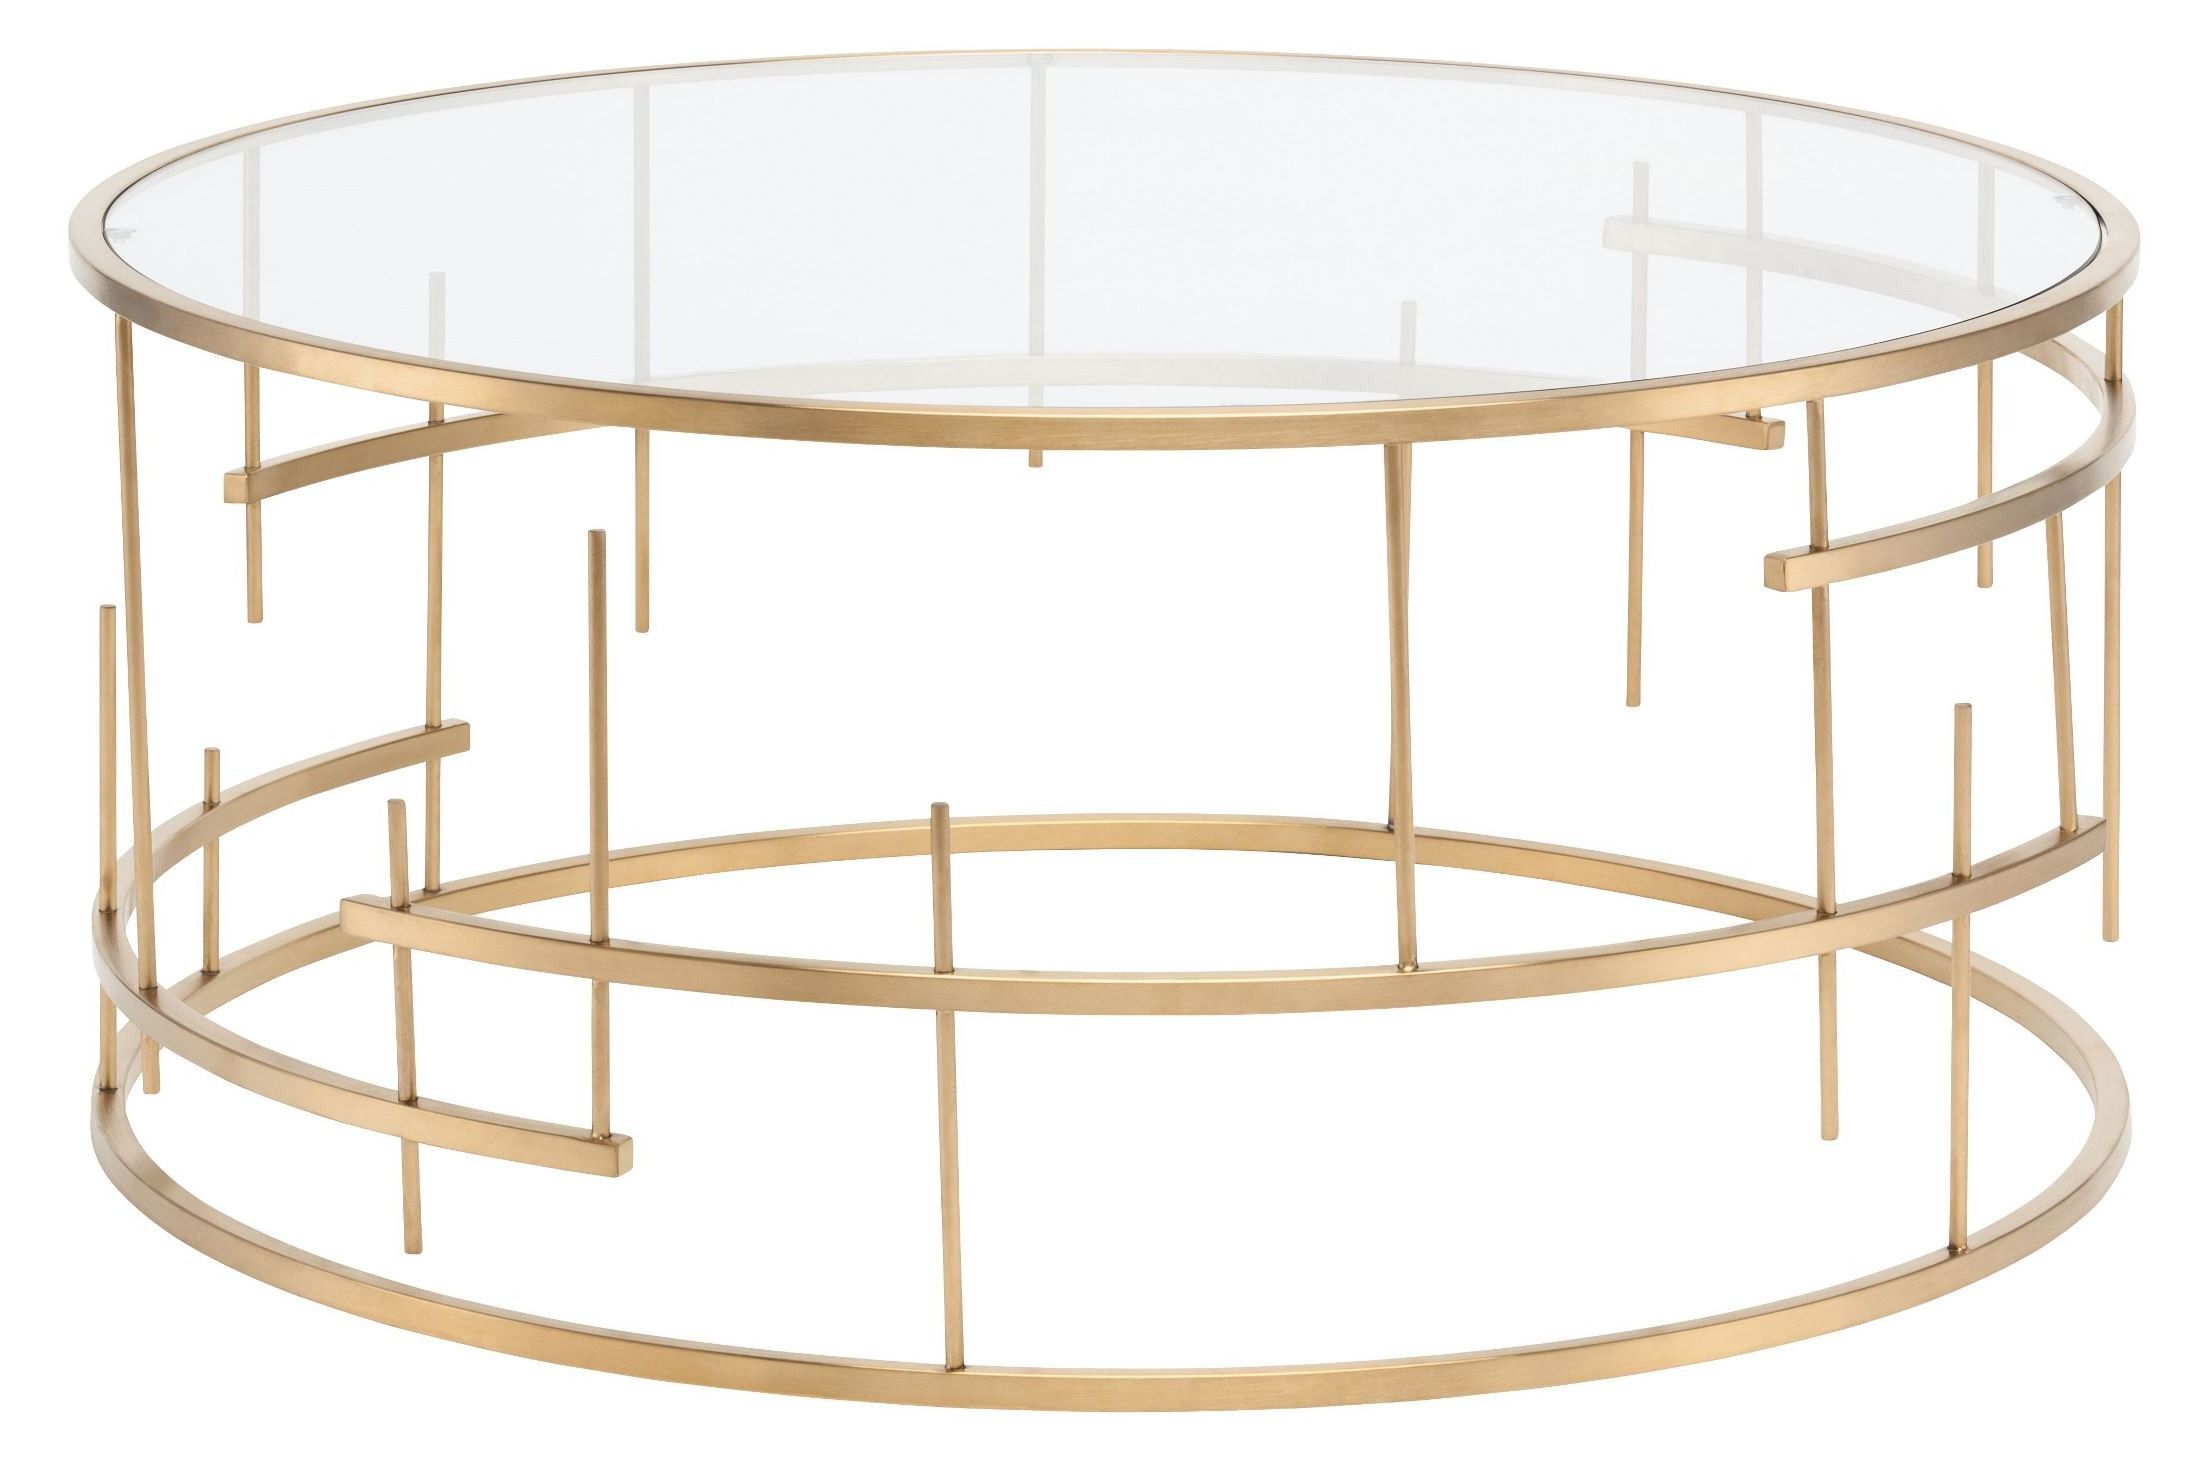 Tiffany Brushed Gold Stainless Coffee Table, Hgde159, Nuevo Within 2019 Square Black And Brushed Gold Coffee Tables (View 7 of 10)